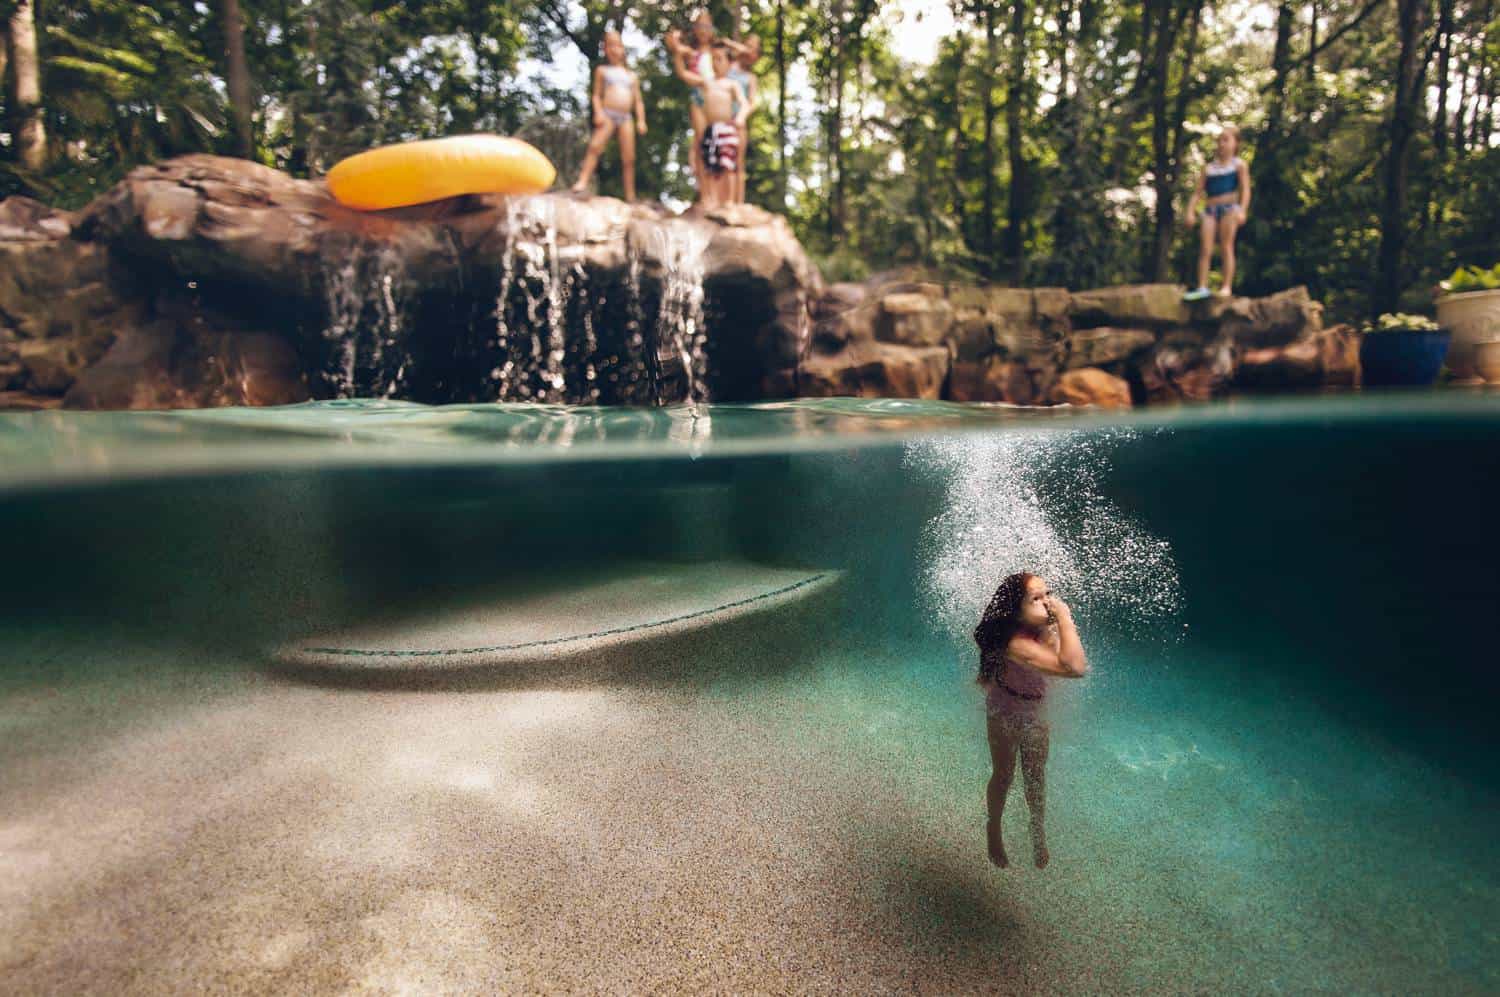 A split-level underwater photographs depicts an above-grown human-made waterfall spilling into a swimming pool where a little child swims toward the surface while holding their nose.